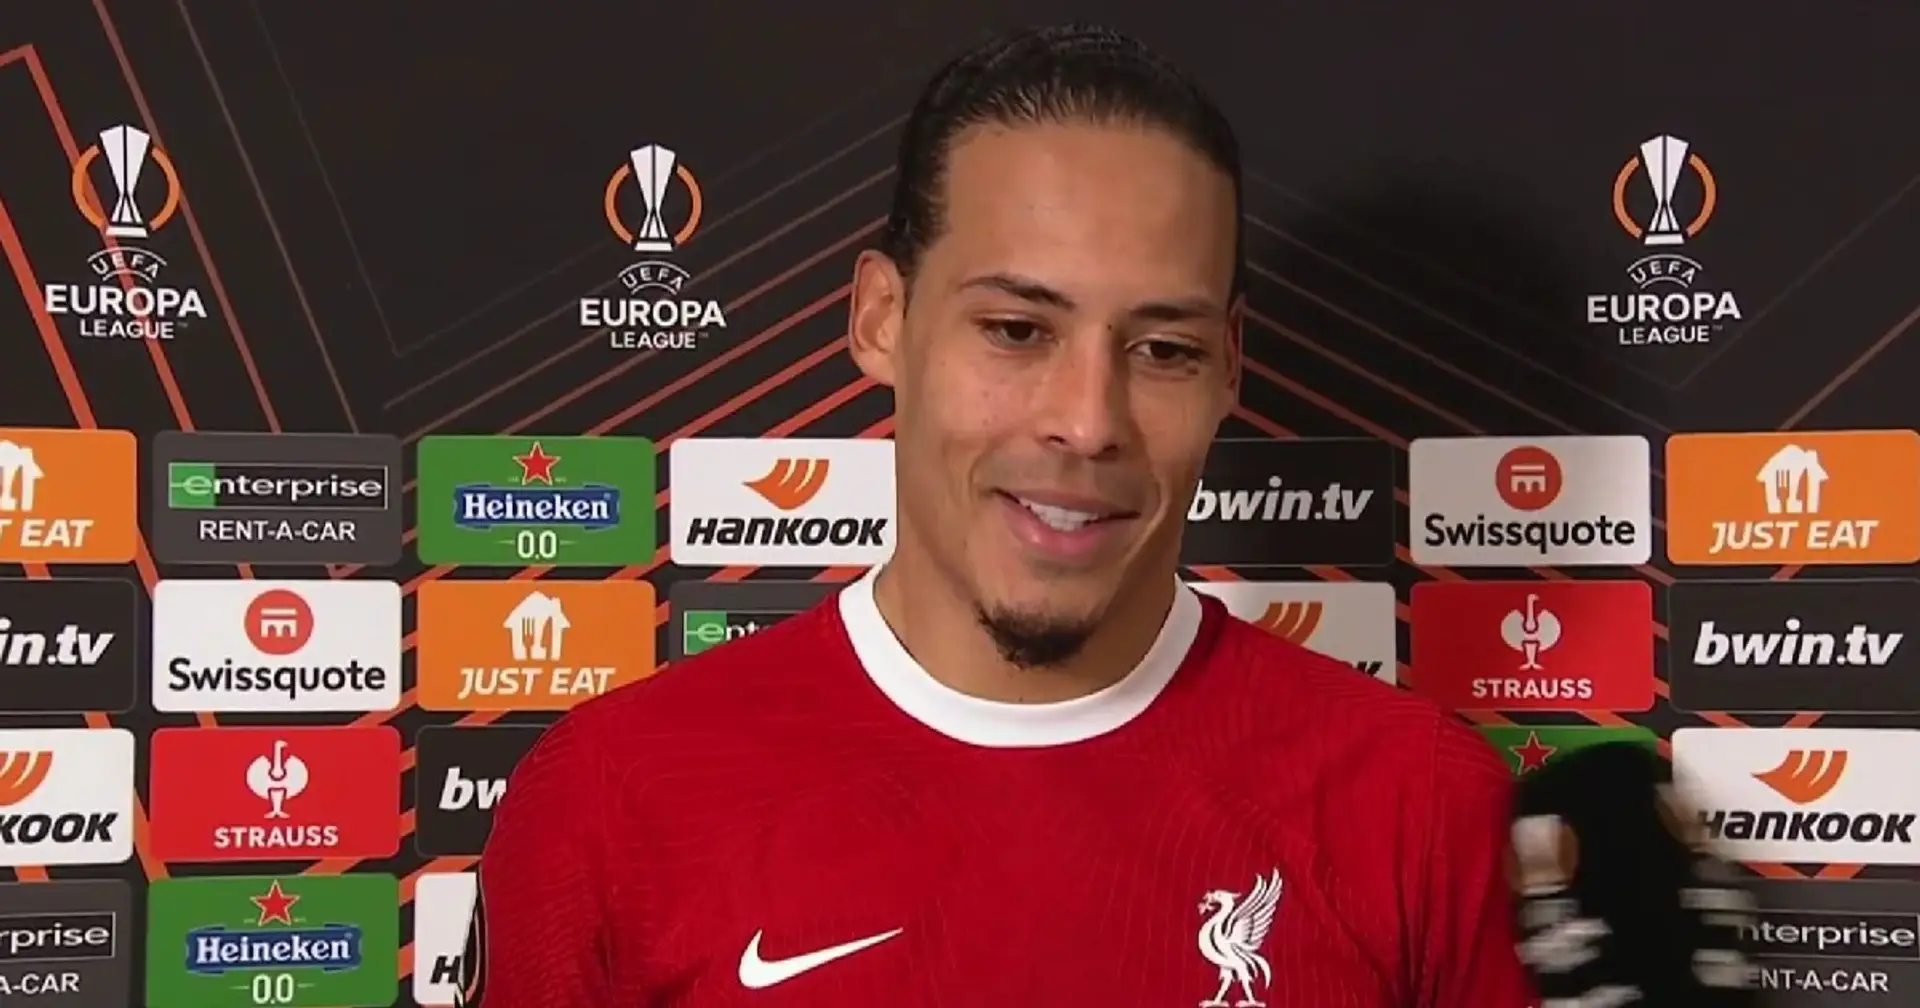 'We don't have time to feel disappointed': Van Dijk on focusing attention to Premier League title race